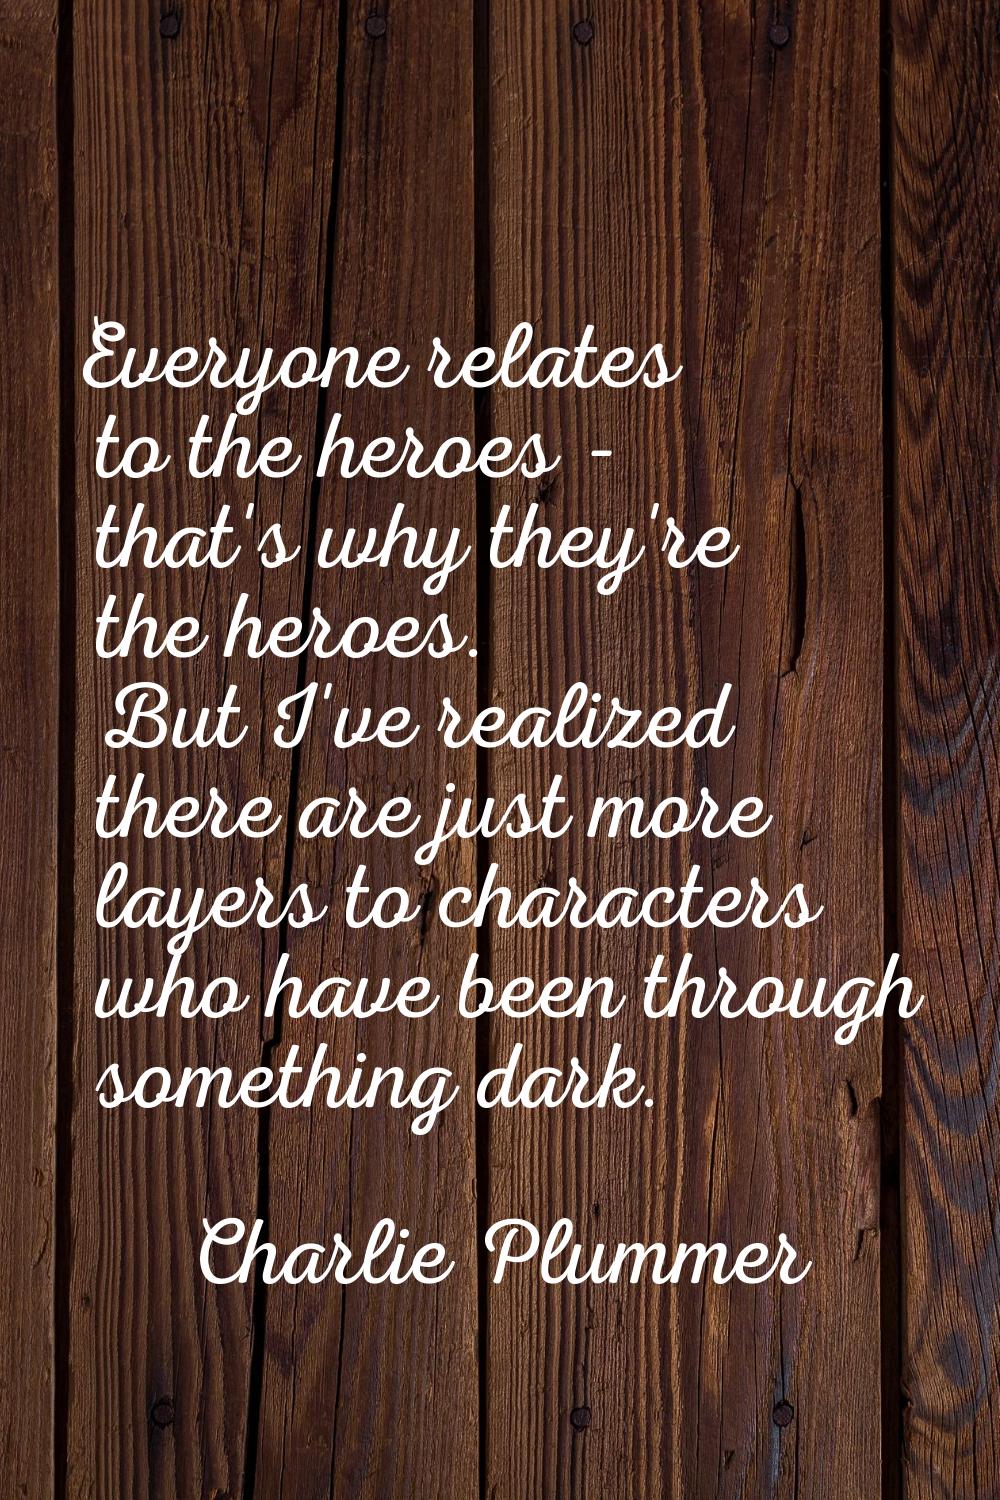 Everyone relates to the heroes - that's why they're the heroes. But I've realized there are just mo